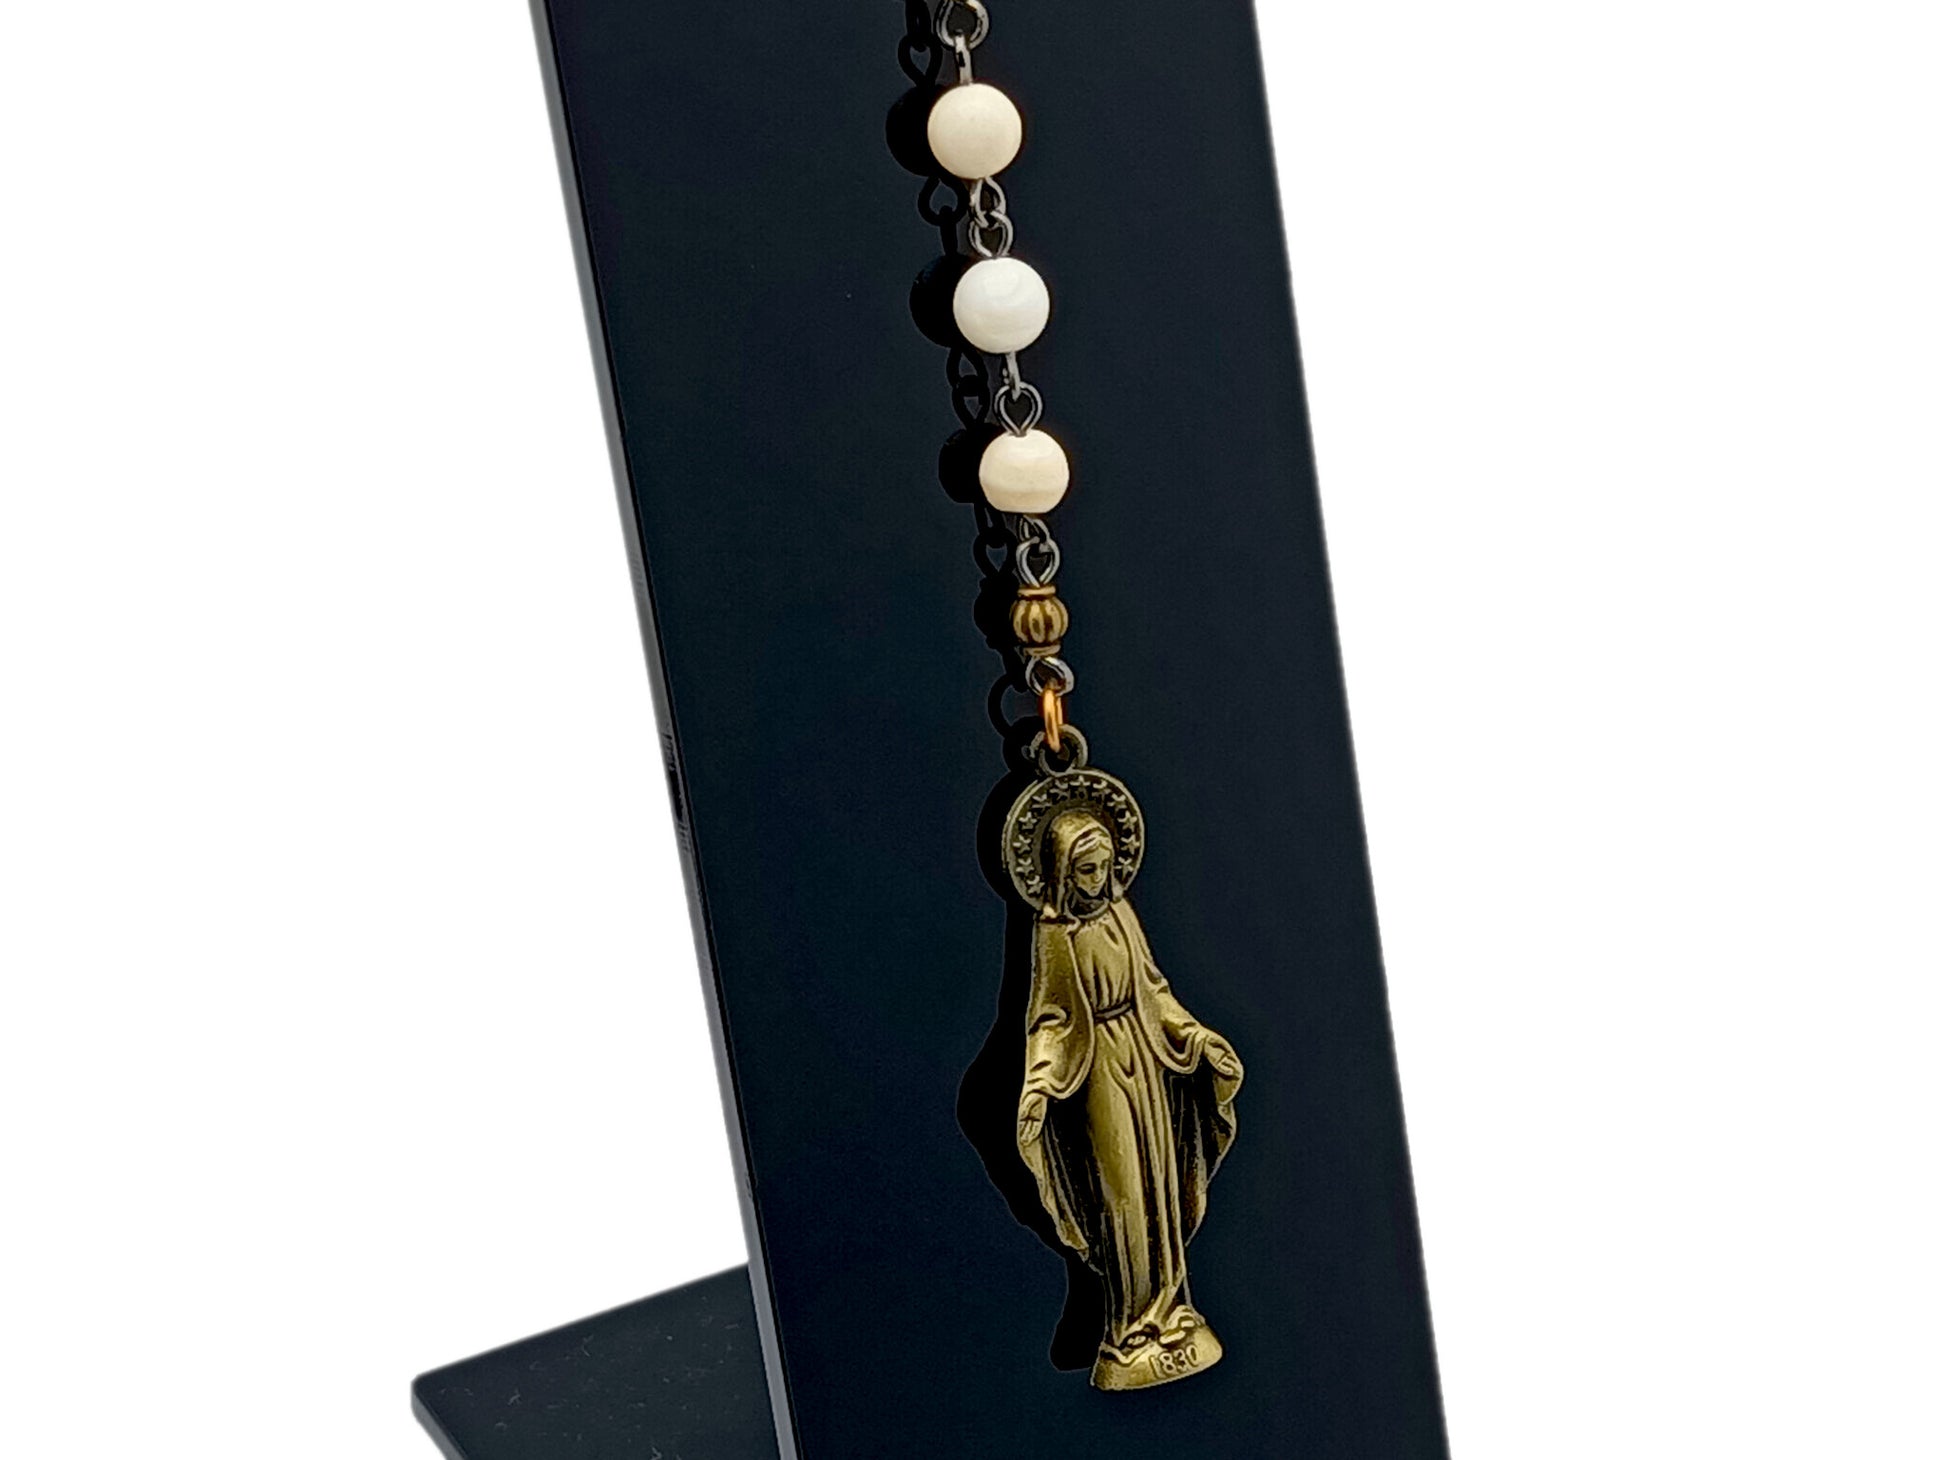 Our Lady of Grace unique rosary beads vintage brass purse clip key chain with mother of pearl Three Hail Mary beads and cross.